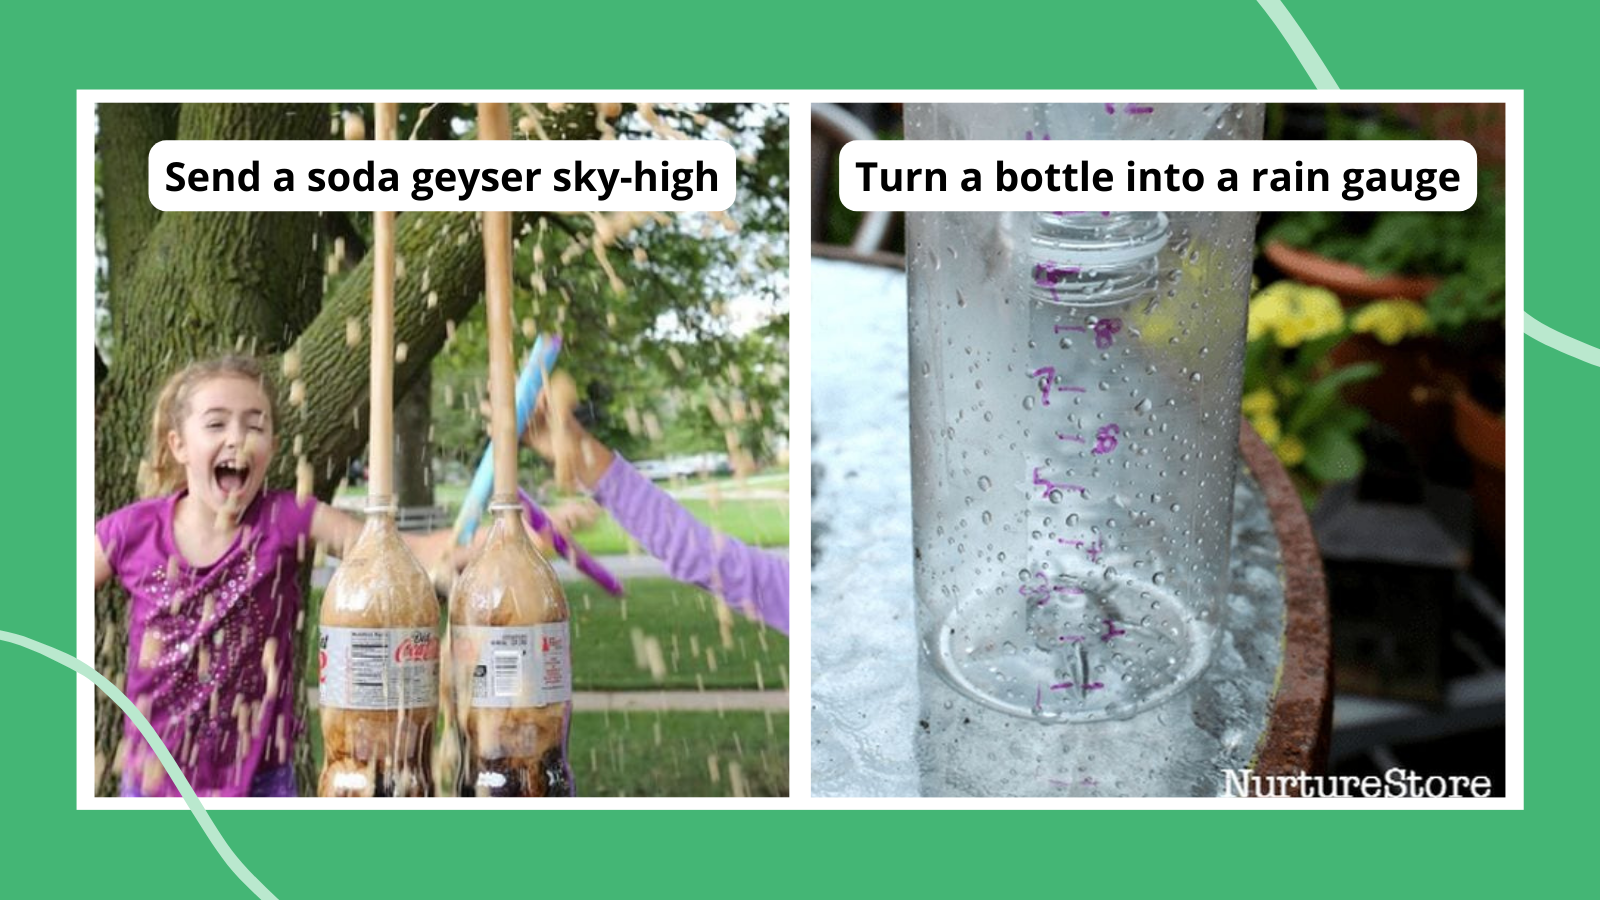 Examples of outdoor science activities on a green background, including kids exploding a soda geyser and making a rain gauge out of a clear bottle.